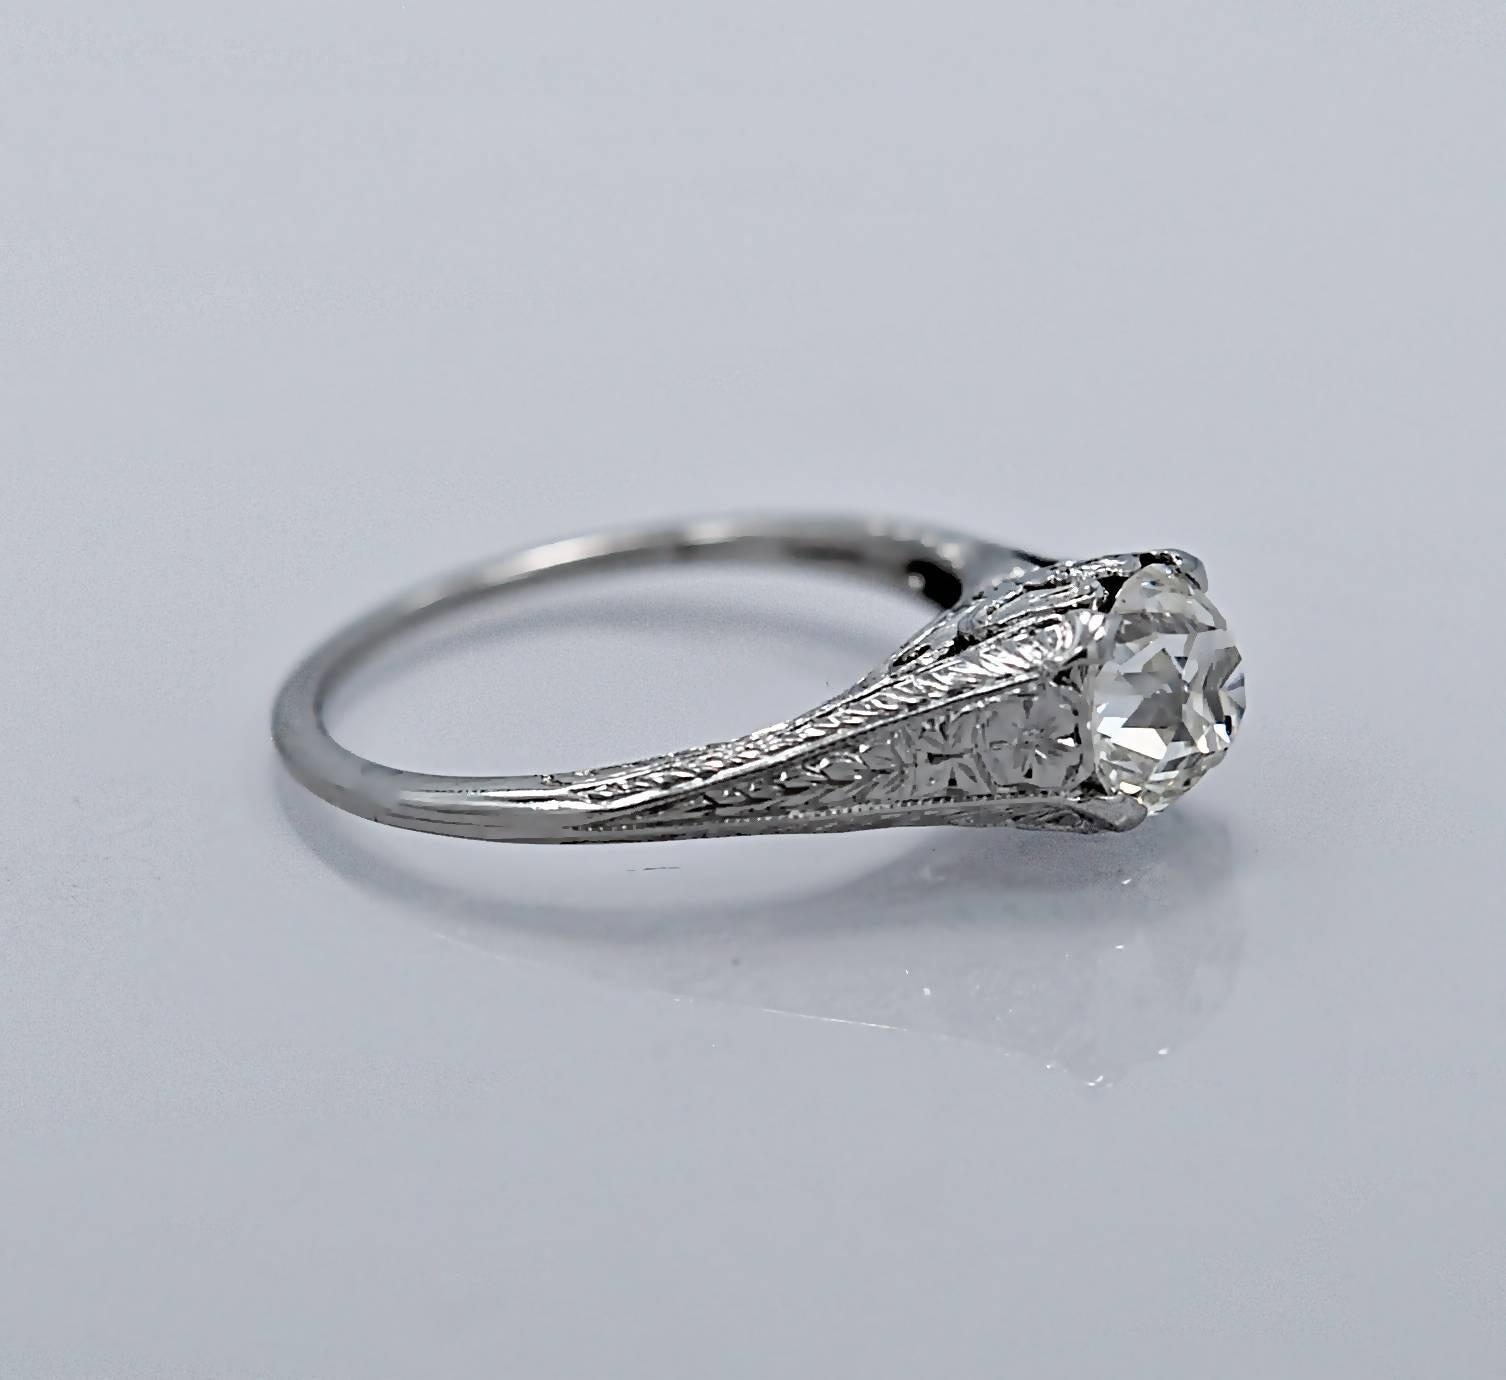 A beautifully designed Art Deco Antique engagement ring featuring a 1.20ct. apx. old mine cut diamond with I1 clarity (100% eye clean) & J color. The mounting is exceptionally made with meticulous filigree containing bows on the gallery. The